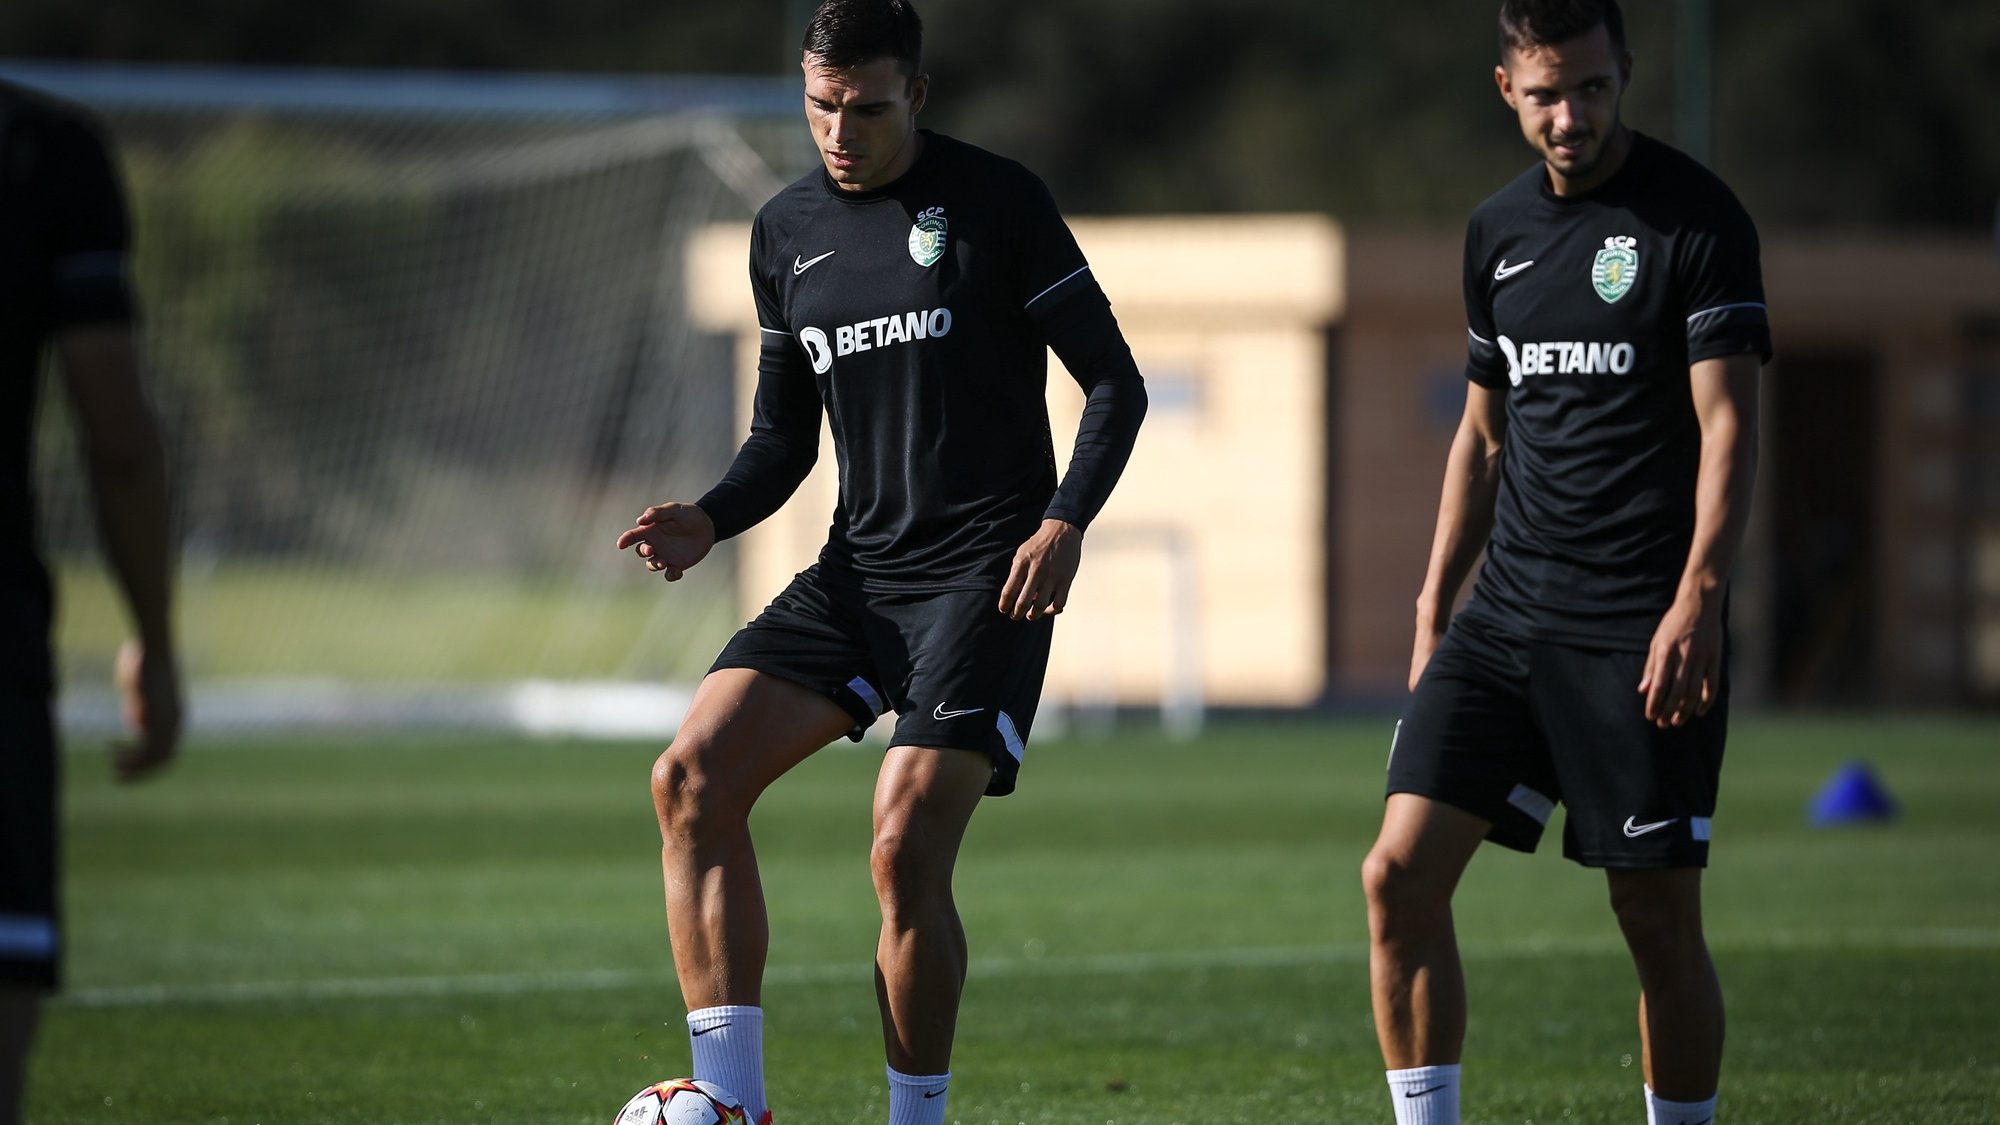 Sporting players João Palhinha (L) and Pablo Sarabia (R) in action during a training session in Alcochete, Portugal, 27 September 2021. Sporting CP will face Borussia Dortmund in Germany on 28 September 2021 in their UEFA Champions League group stage soccer match. RODRIGO ANTUNES/LUSA